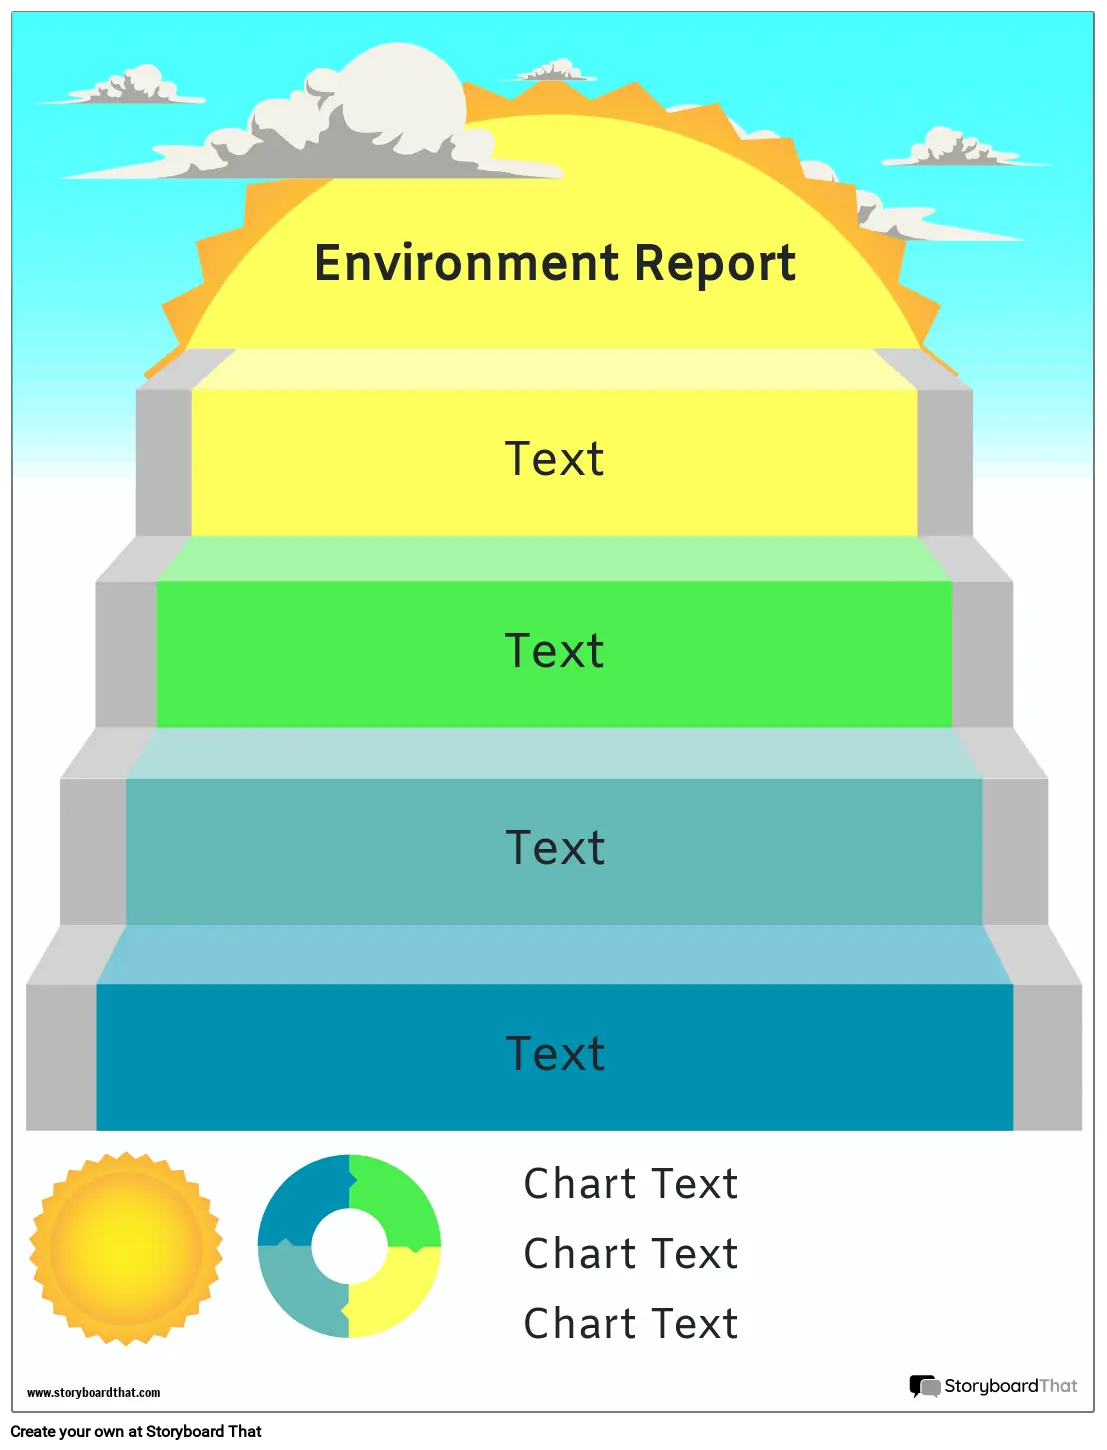 Reports Infographic 1